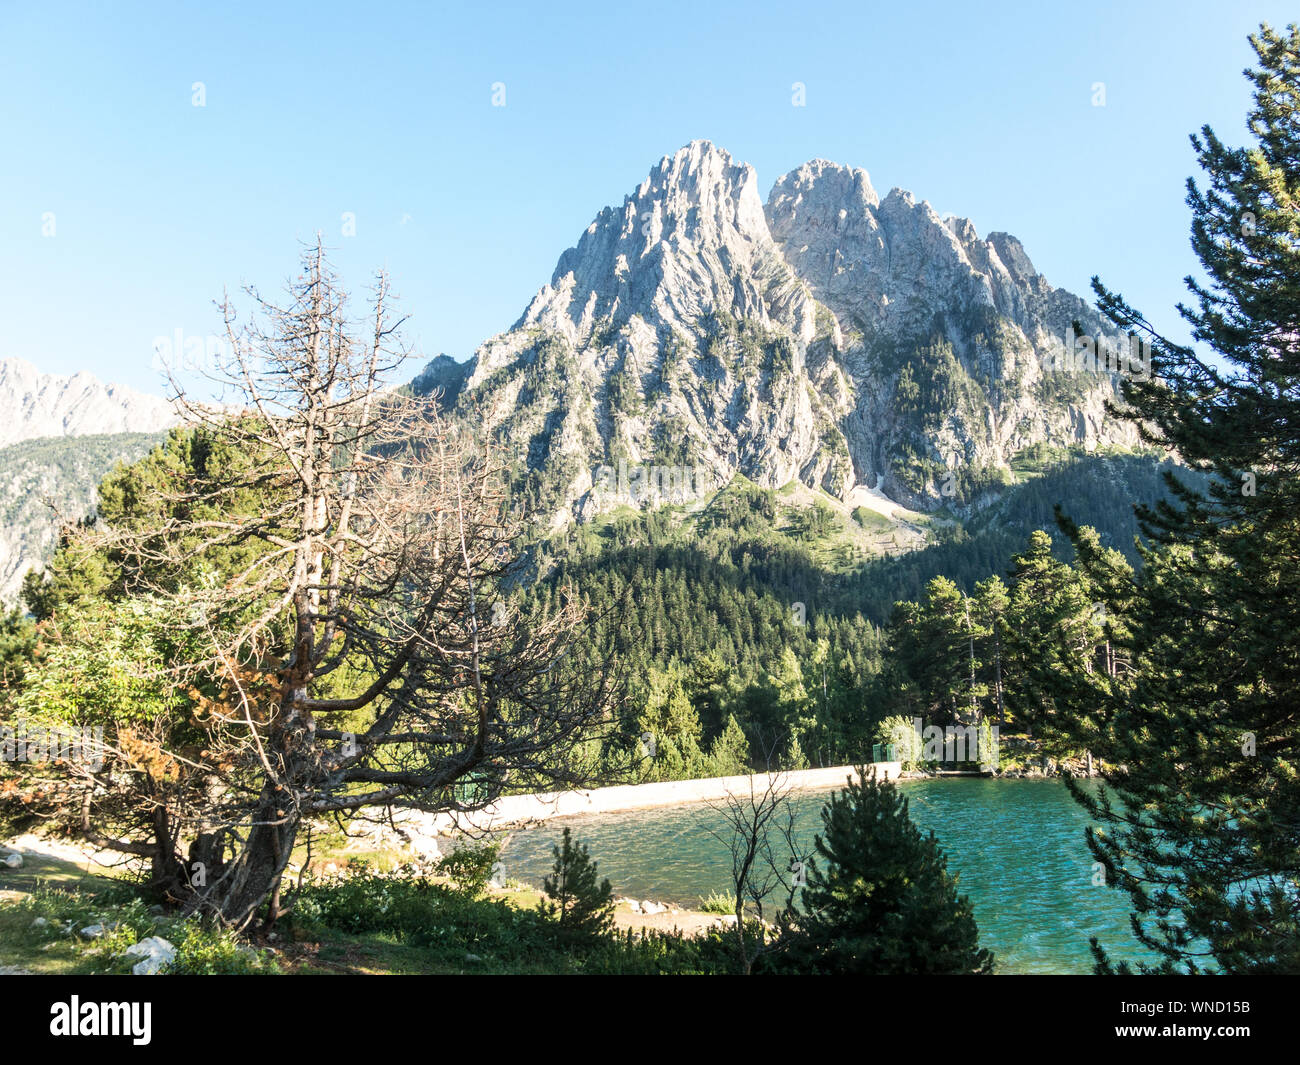 Pond of Sant Maurici, in the Aiguestortes and Sant Maurici National Park. The peak Amitges on background. Lleida, Catalonia, Spain, Europa Stock Photo